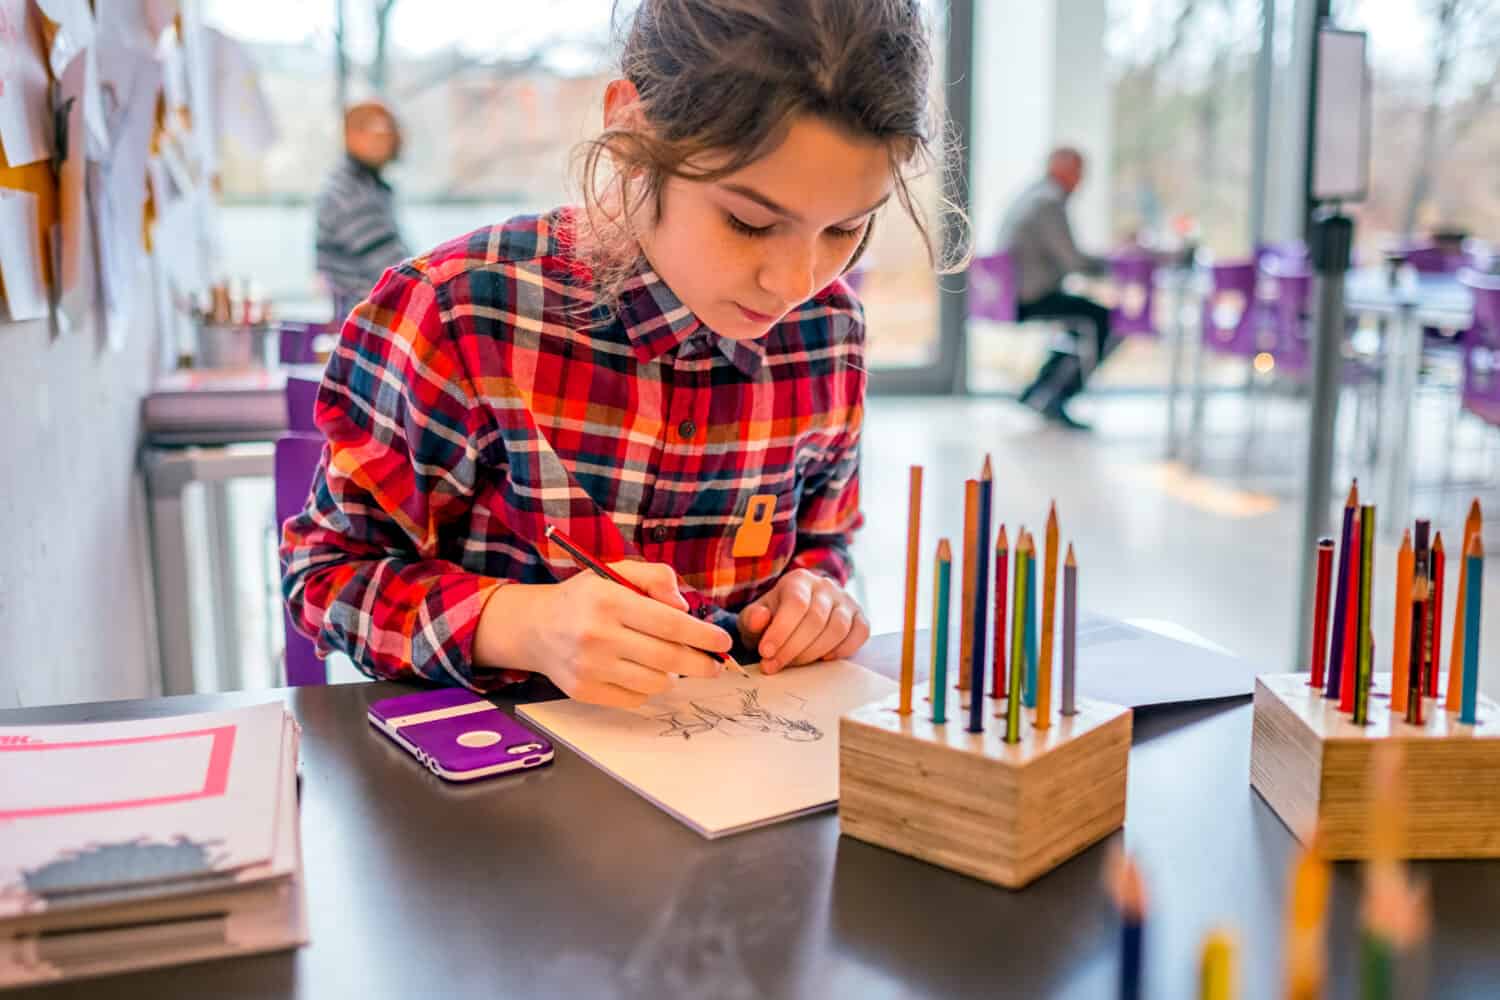 Cute schoolgirl drawing with pencils. A concept of teaching drawing, master classes in museums. Children's creativity, education. Danish national gallery. Educational programs.